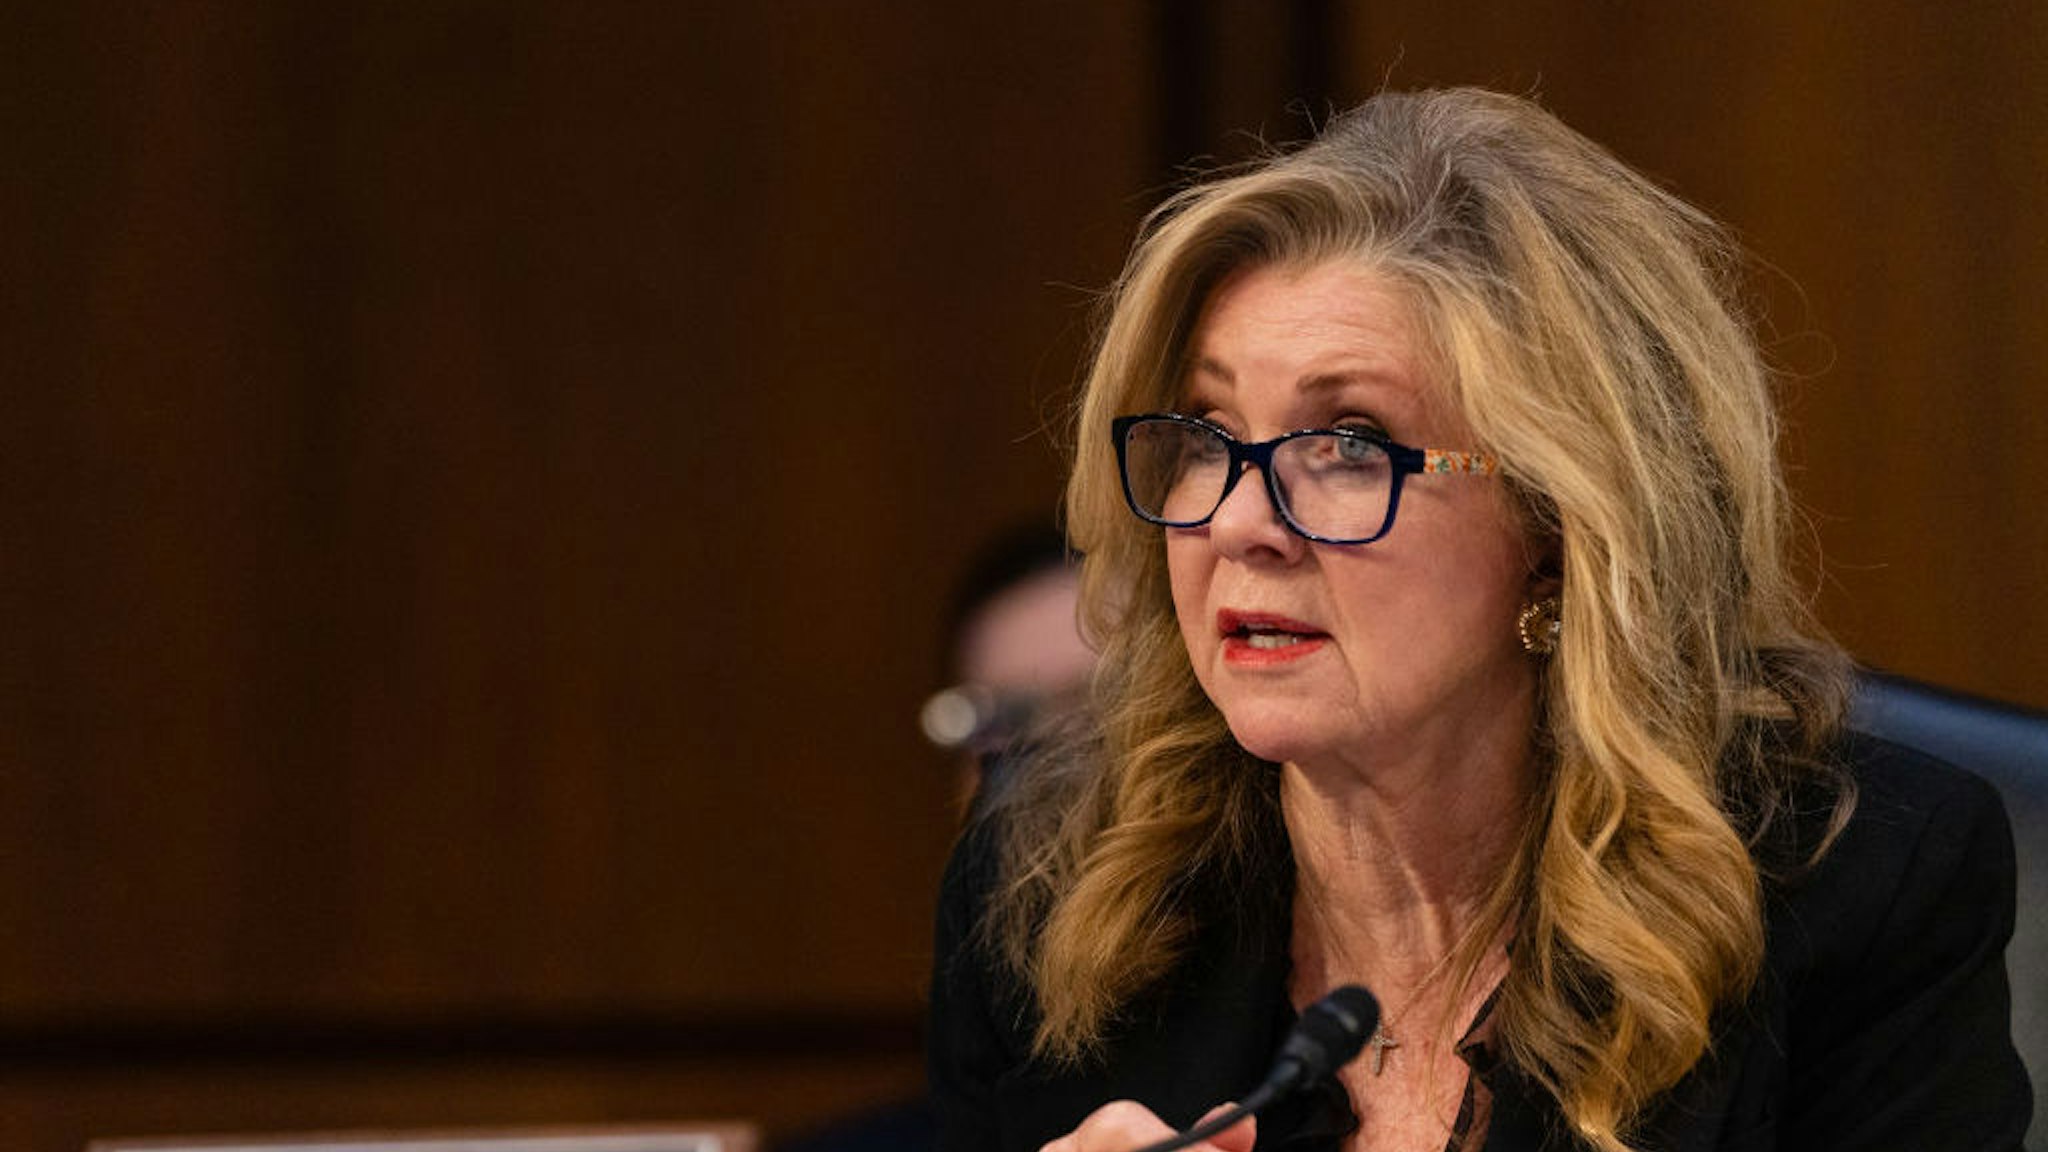 Senator Marsha Blackburn, a Republican from Tennessee, speaks during a Senate Judiciary Committee confirmation hearing for Ketanji Brown Jackson, associate justice of the U.S. Supreme Court nominee for U.S. President Joe Biden, in Washington, D.C., U.S., on Wednesday, March 23, 2022. Jackson held her own against a barrage of Republican attacks centering on crime and race, inching closer to becoming the first Black woman on the Supreme Court in a marathon day of testimony before a Senate panel yesterday. Photographer: Eric Lee/Bloomberg